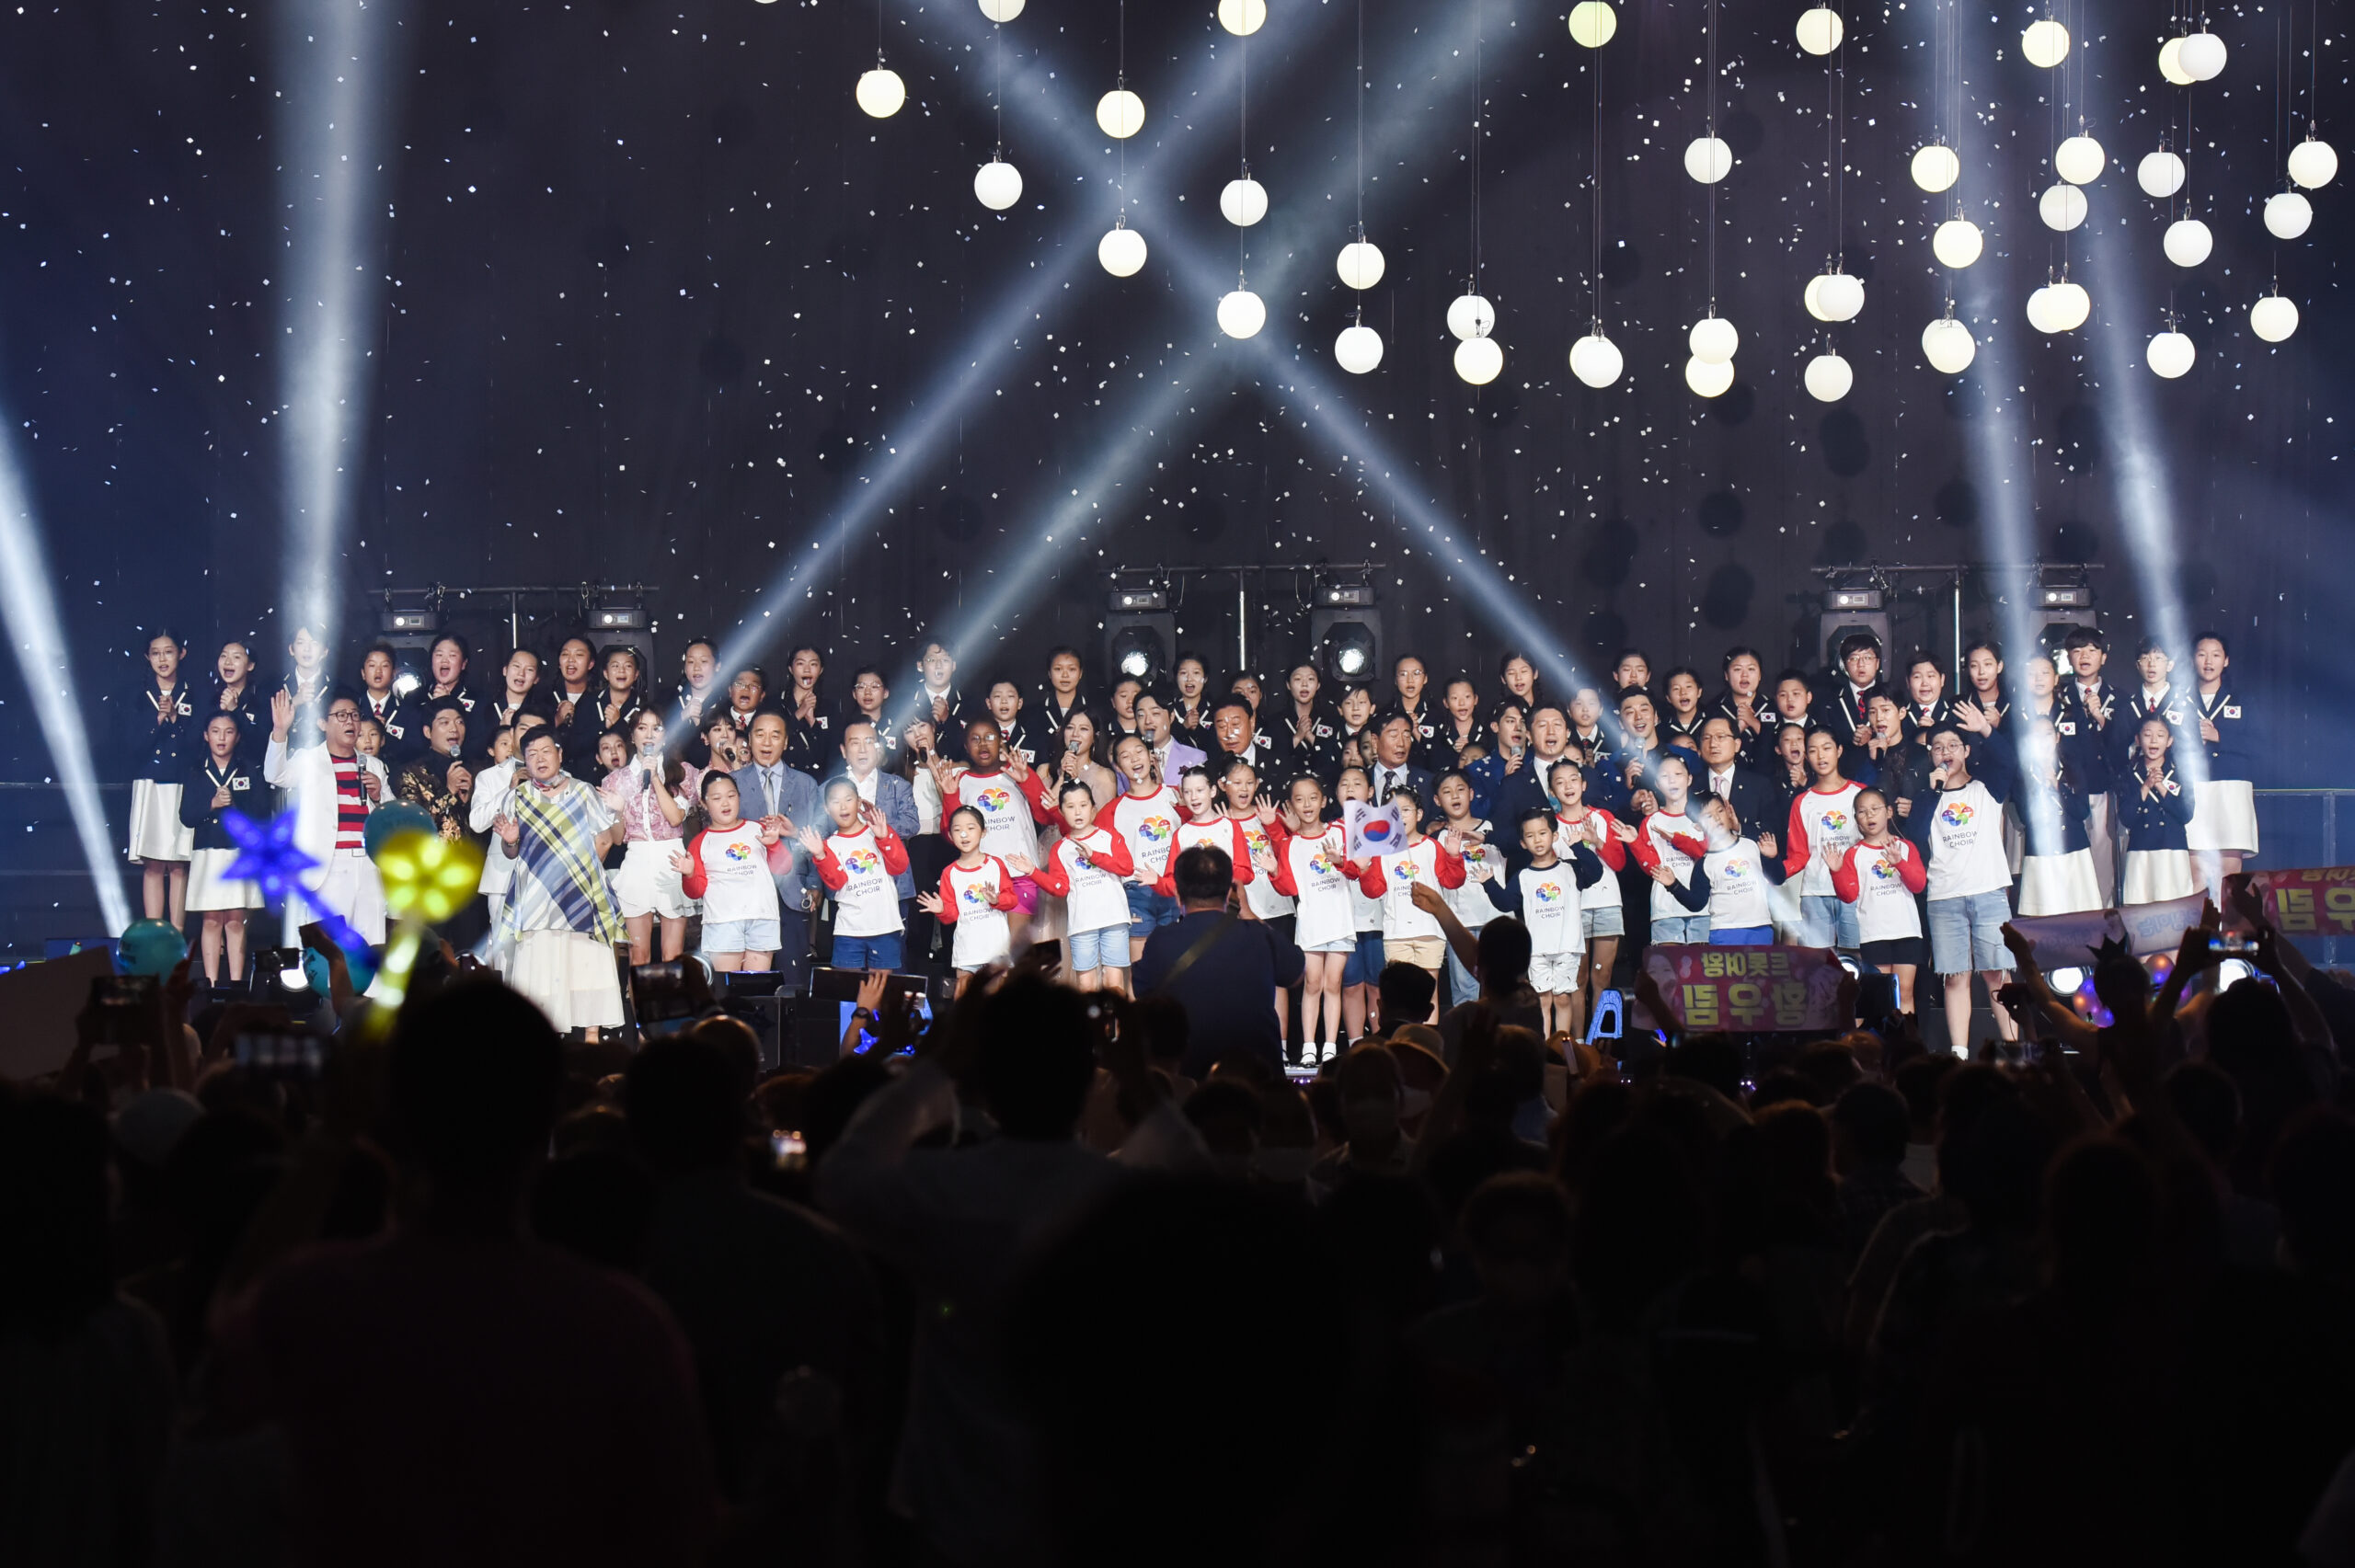 All Performers and Audience Sing Heartfelt Finale for Reunification of Korea